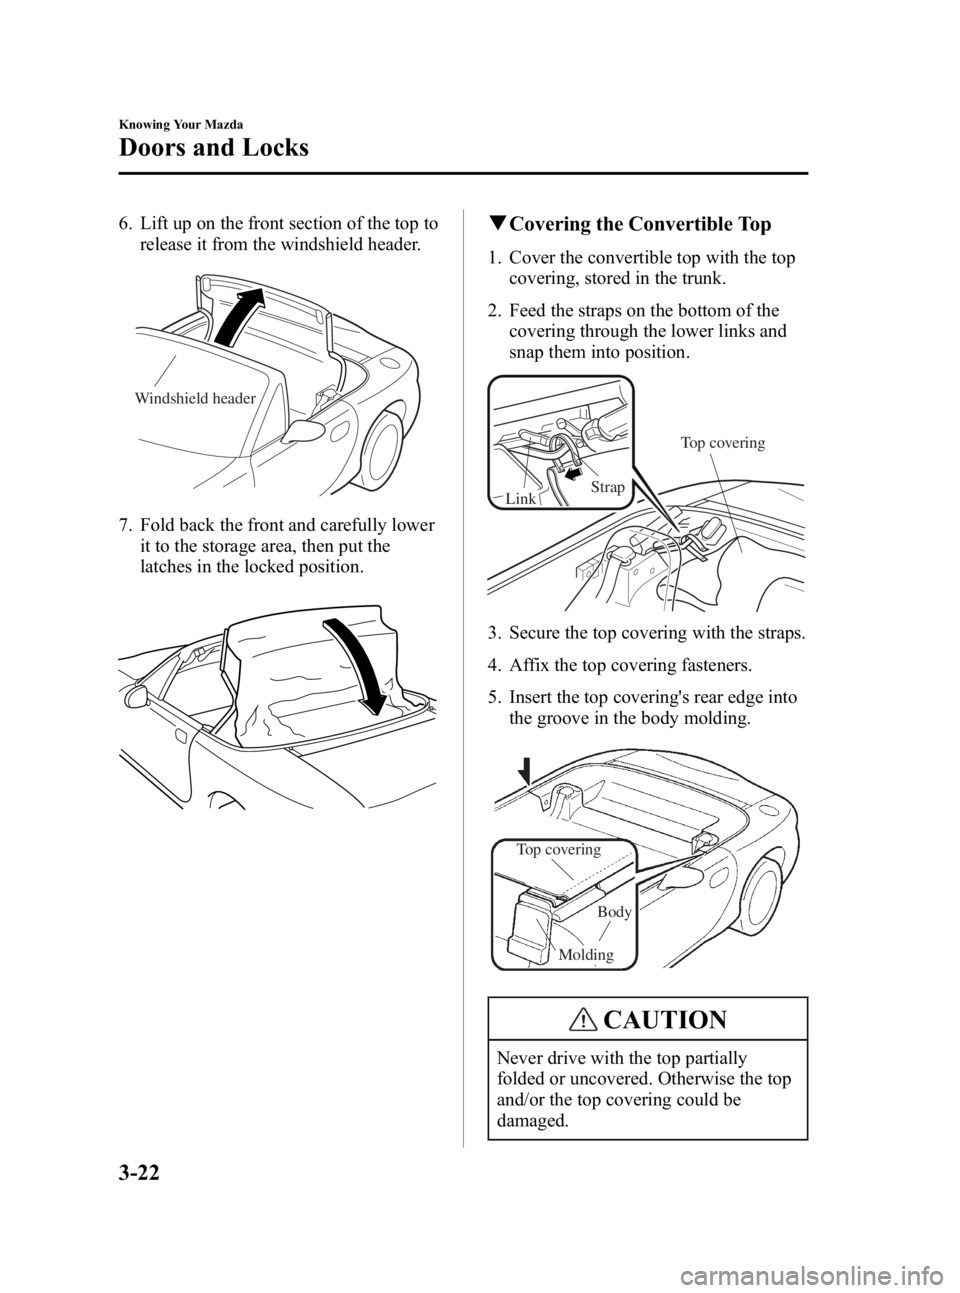 MAZDA MODEL MX-5 MIATA 2005 Repair Manual Black plate (64,1)
6. Lift up on the front section of the top torelease it from the windshield header.
Windshield header
7. Fold back the front and carefully lower
it to the storage area, then put the